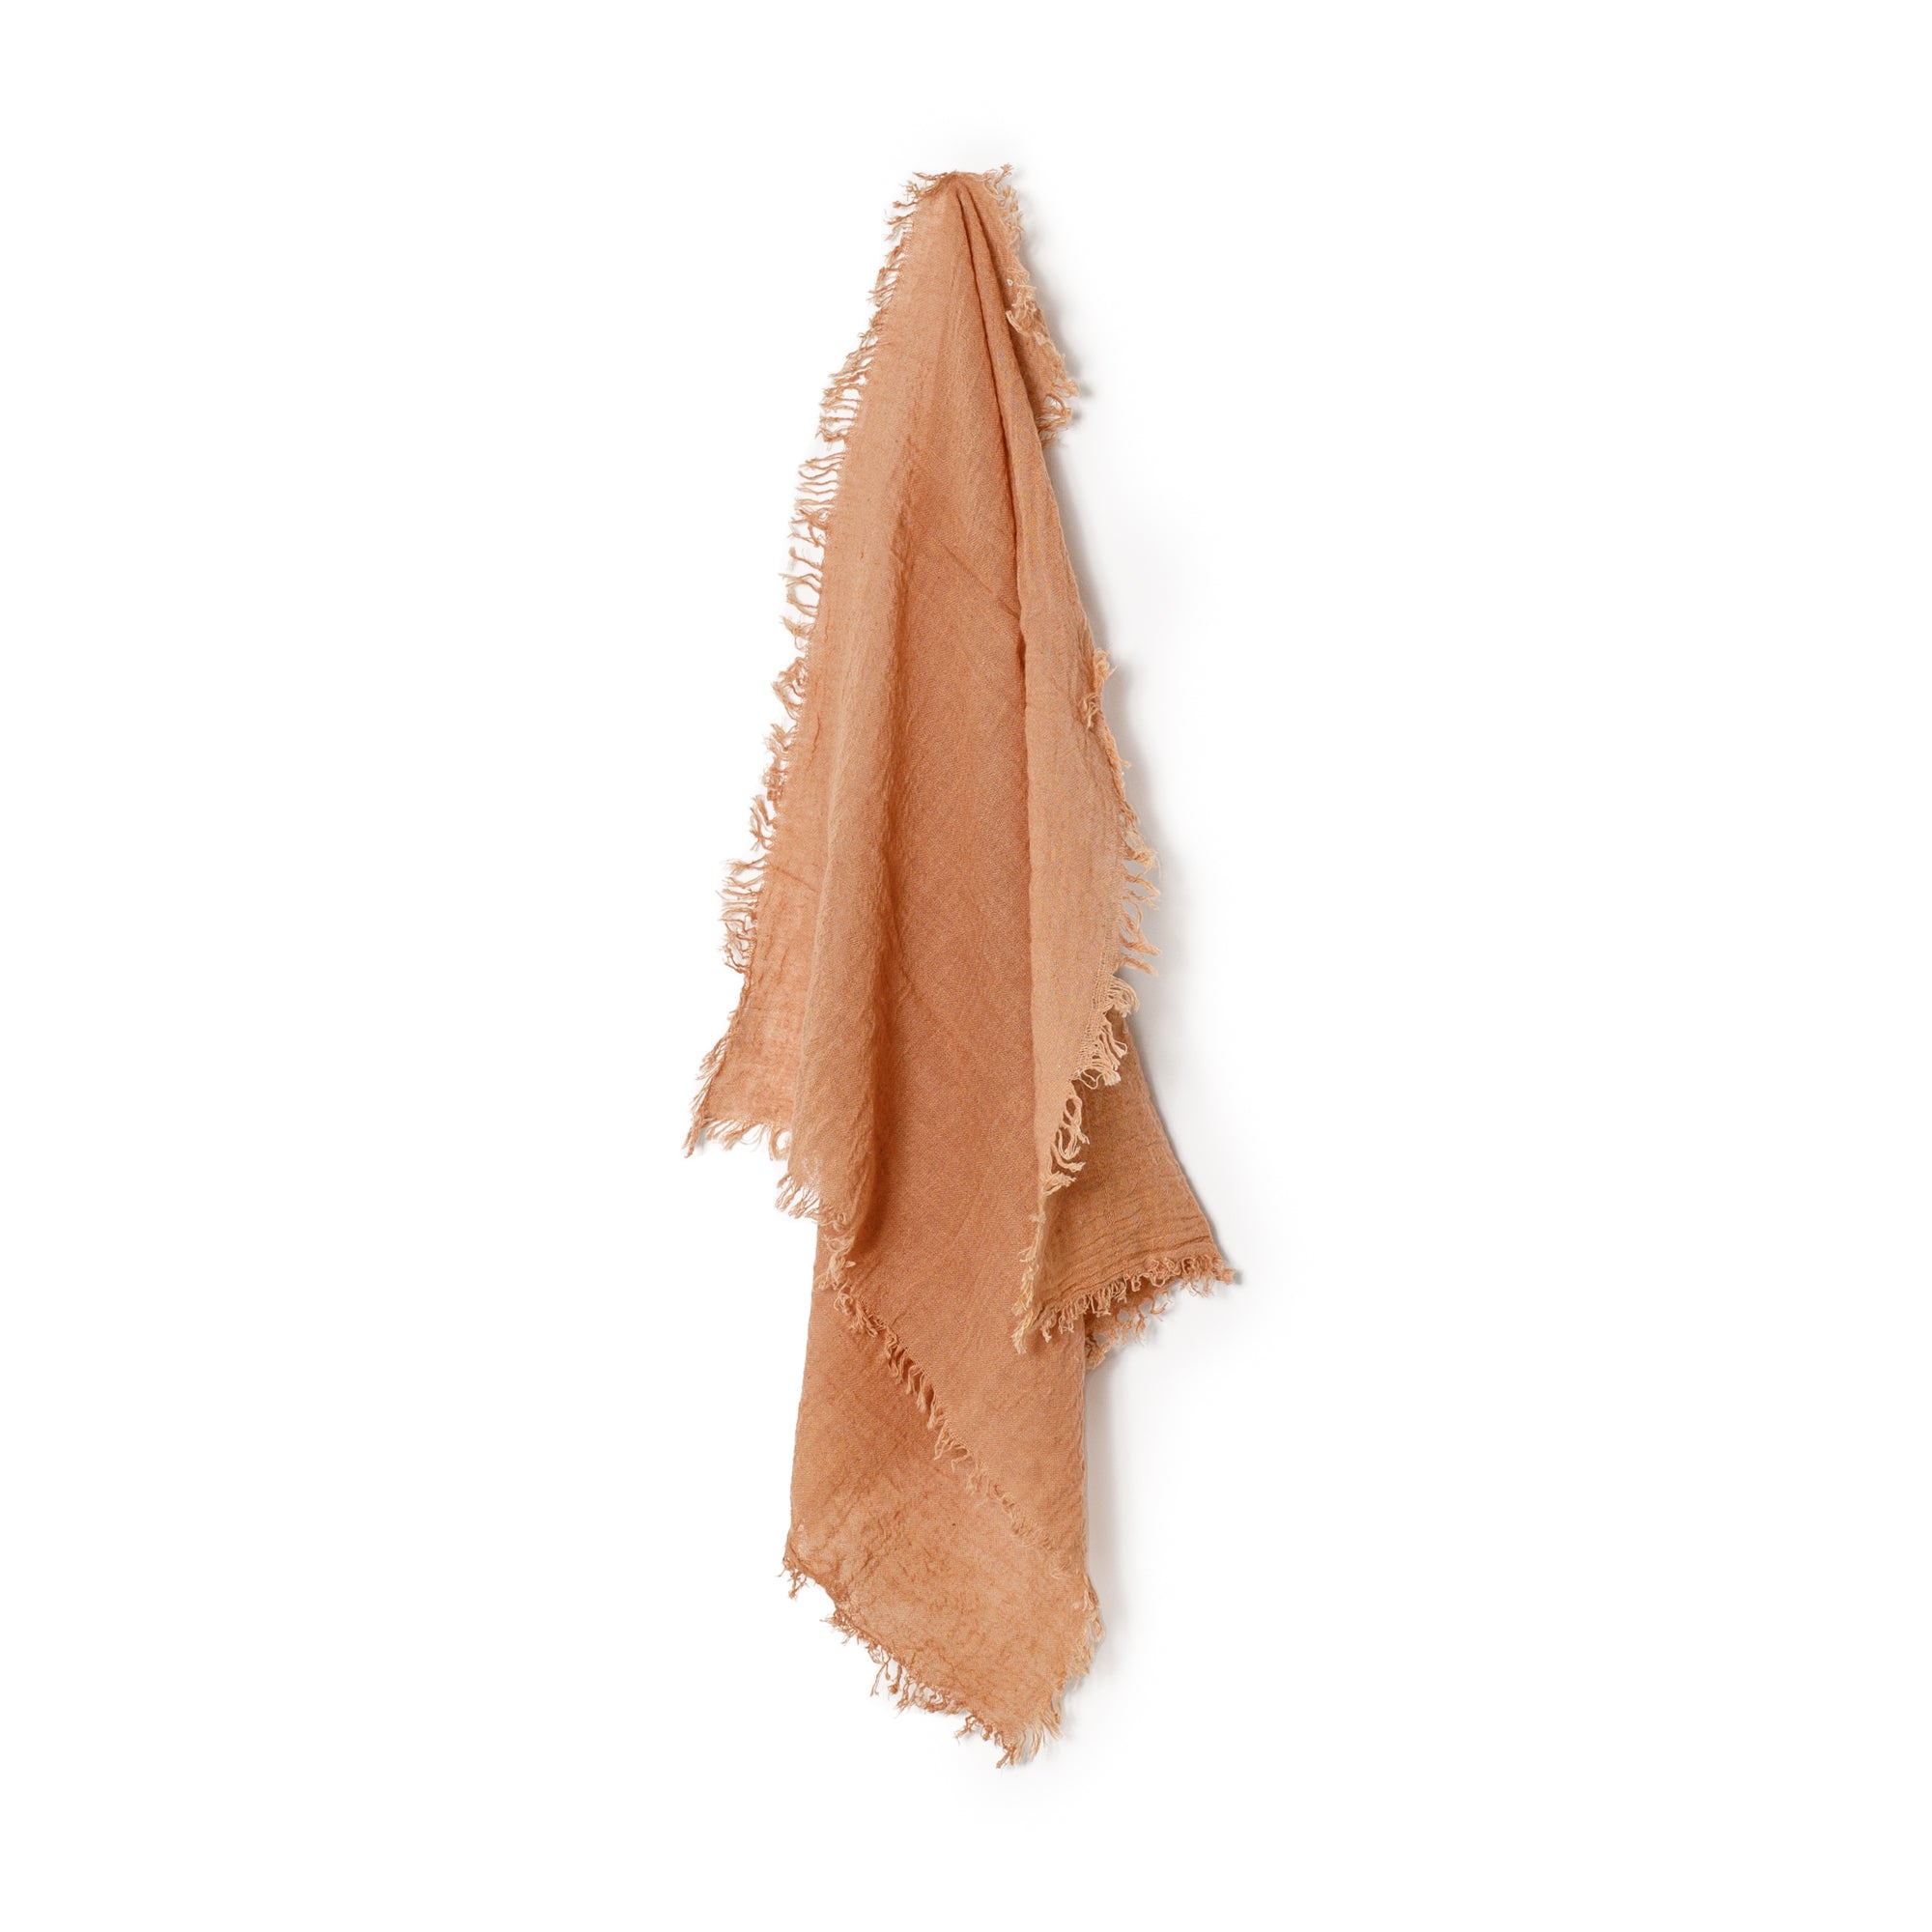 Terracotta Textured Cotton Napkin For Hire | For Love & Living Gold Coast wedding & Events Hire